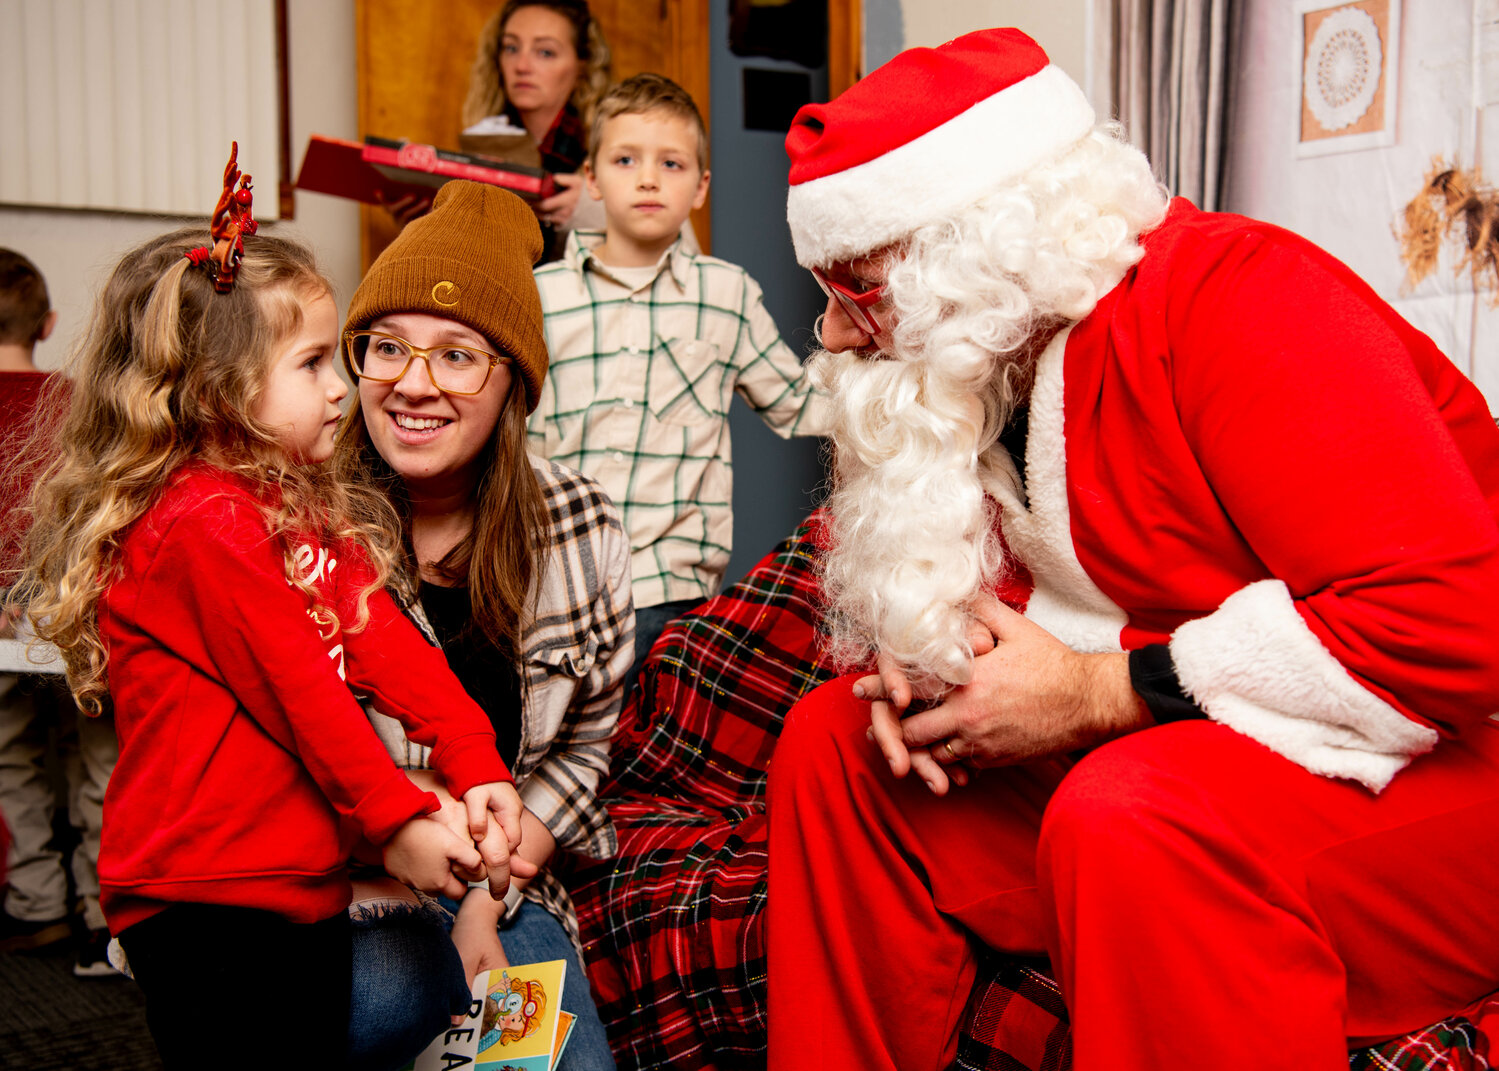 Above: Libby Percoco has a chat with Santa while mom April looks on.